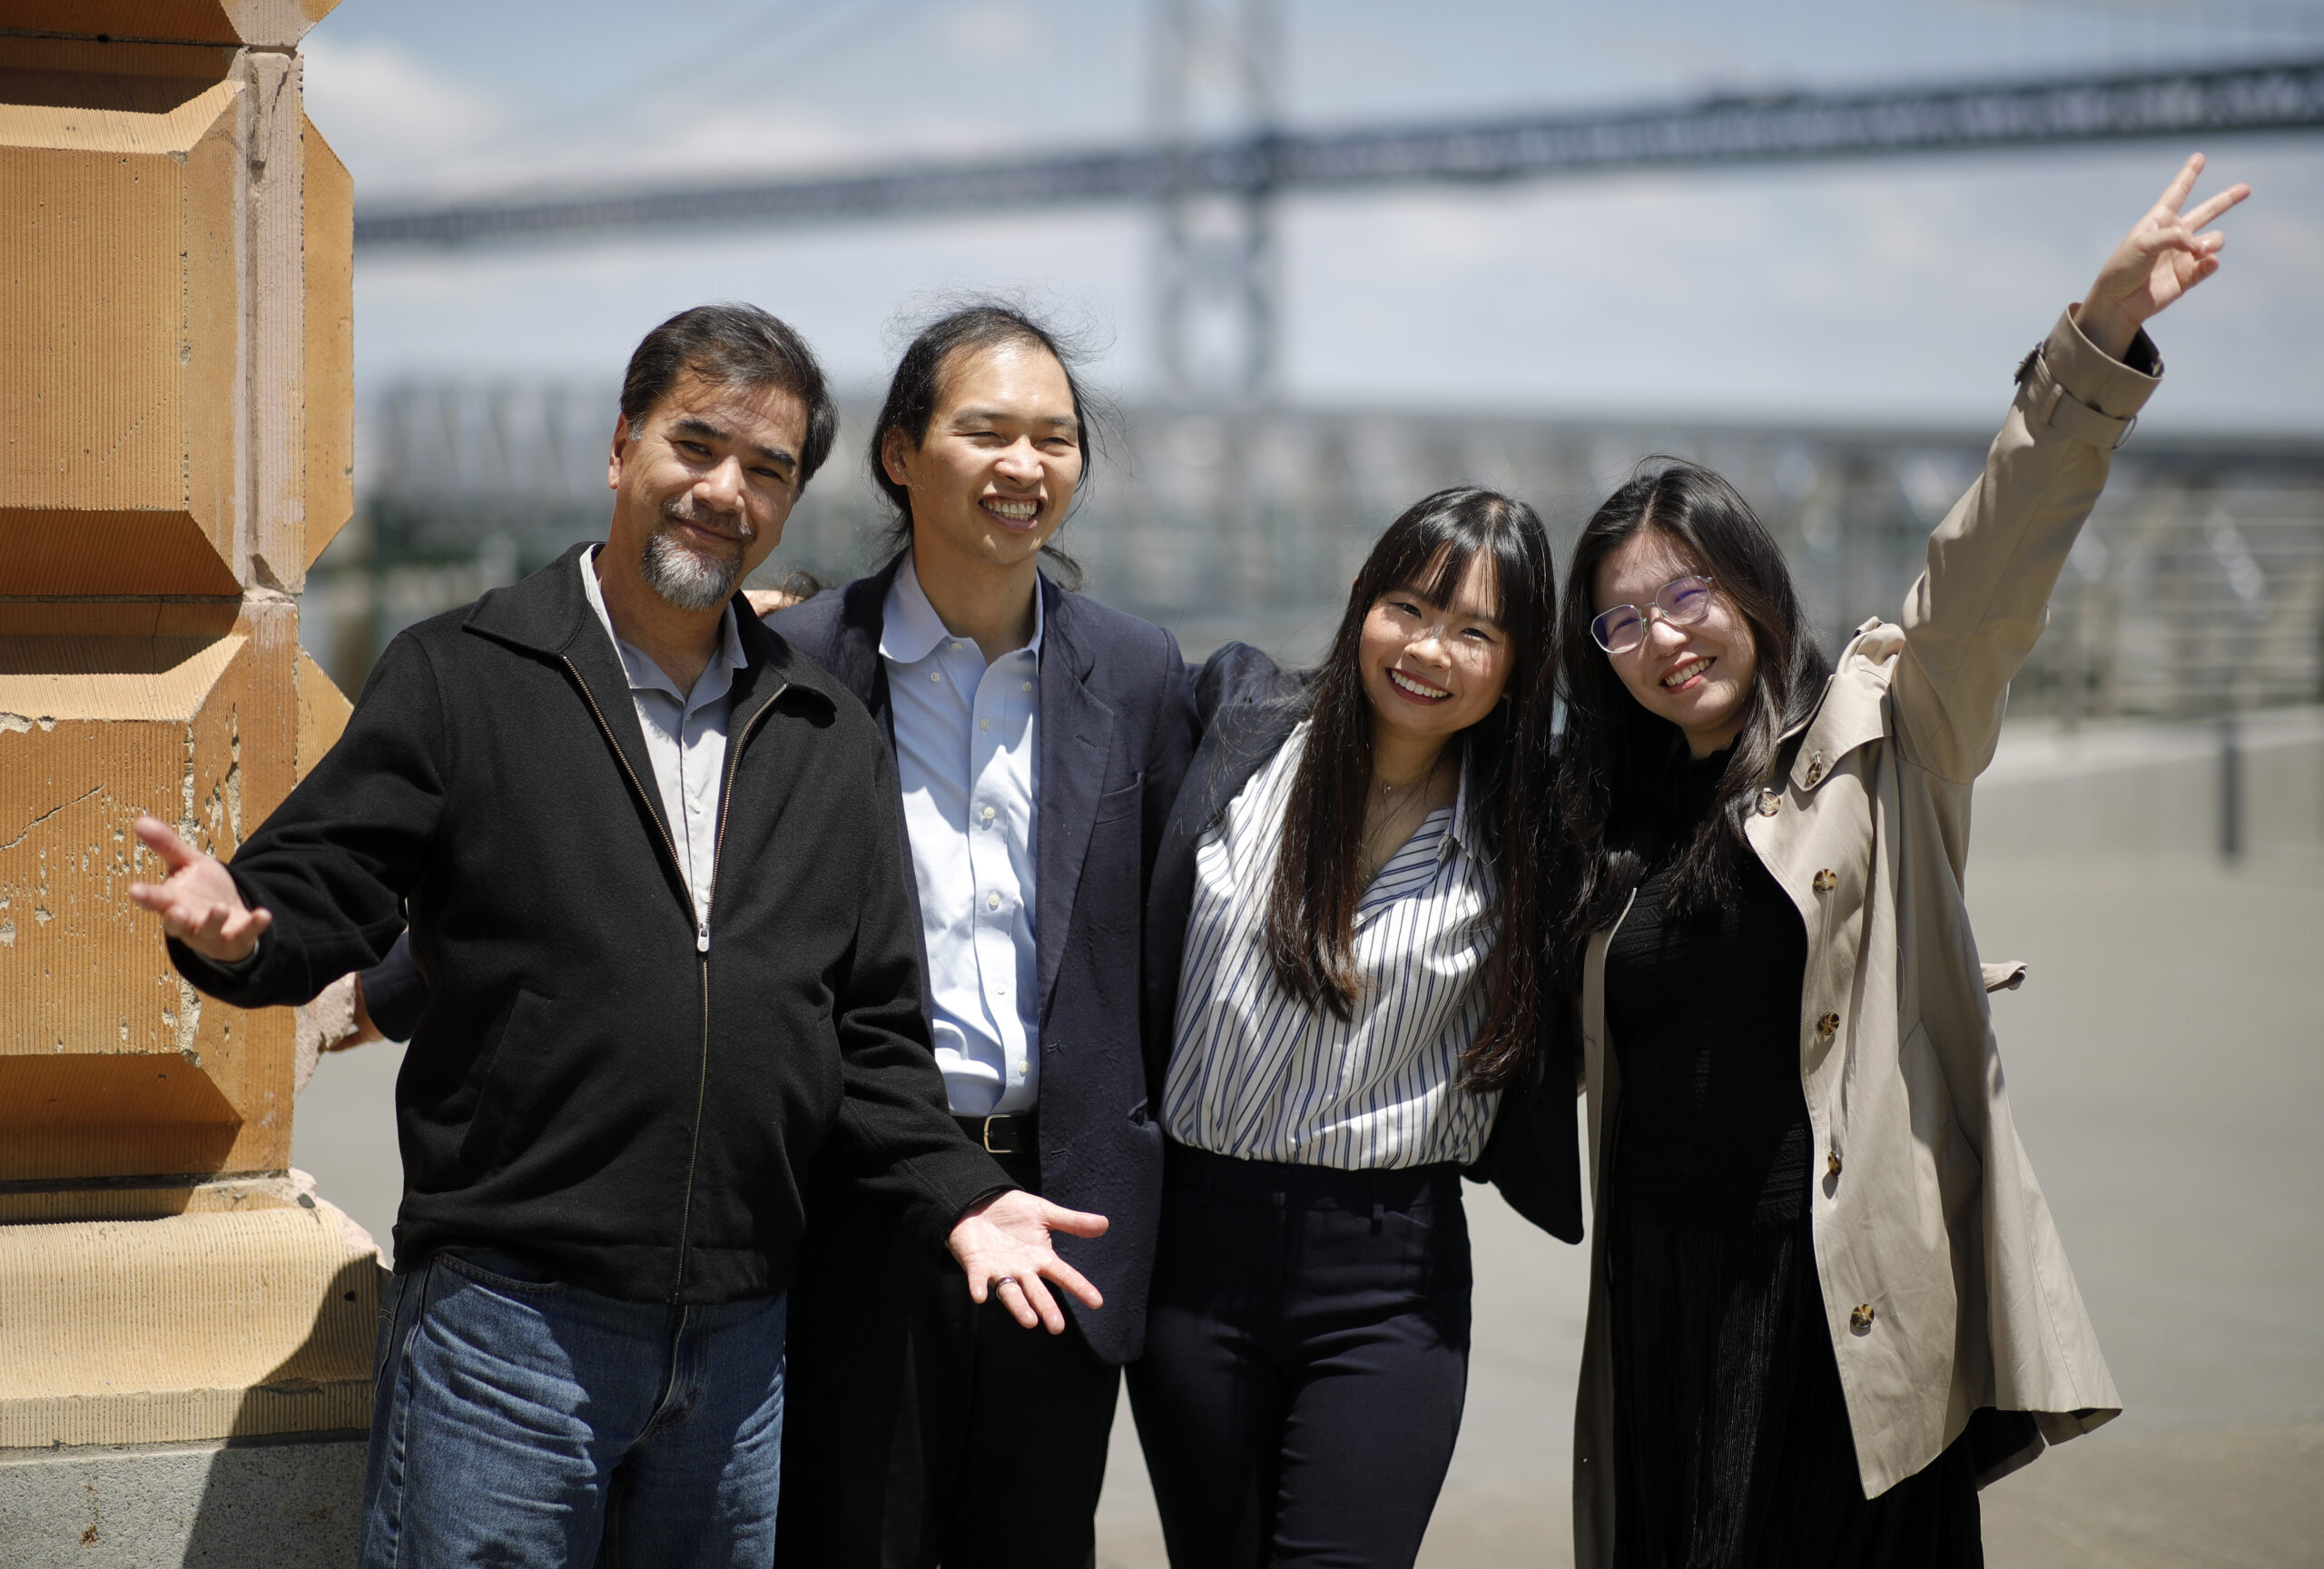 Four people wearing business clothes standing in front of the Bay Bridge smiling.